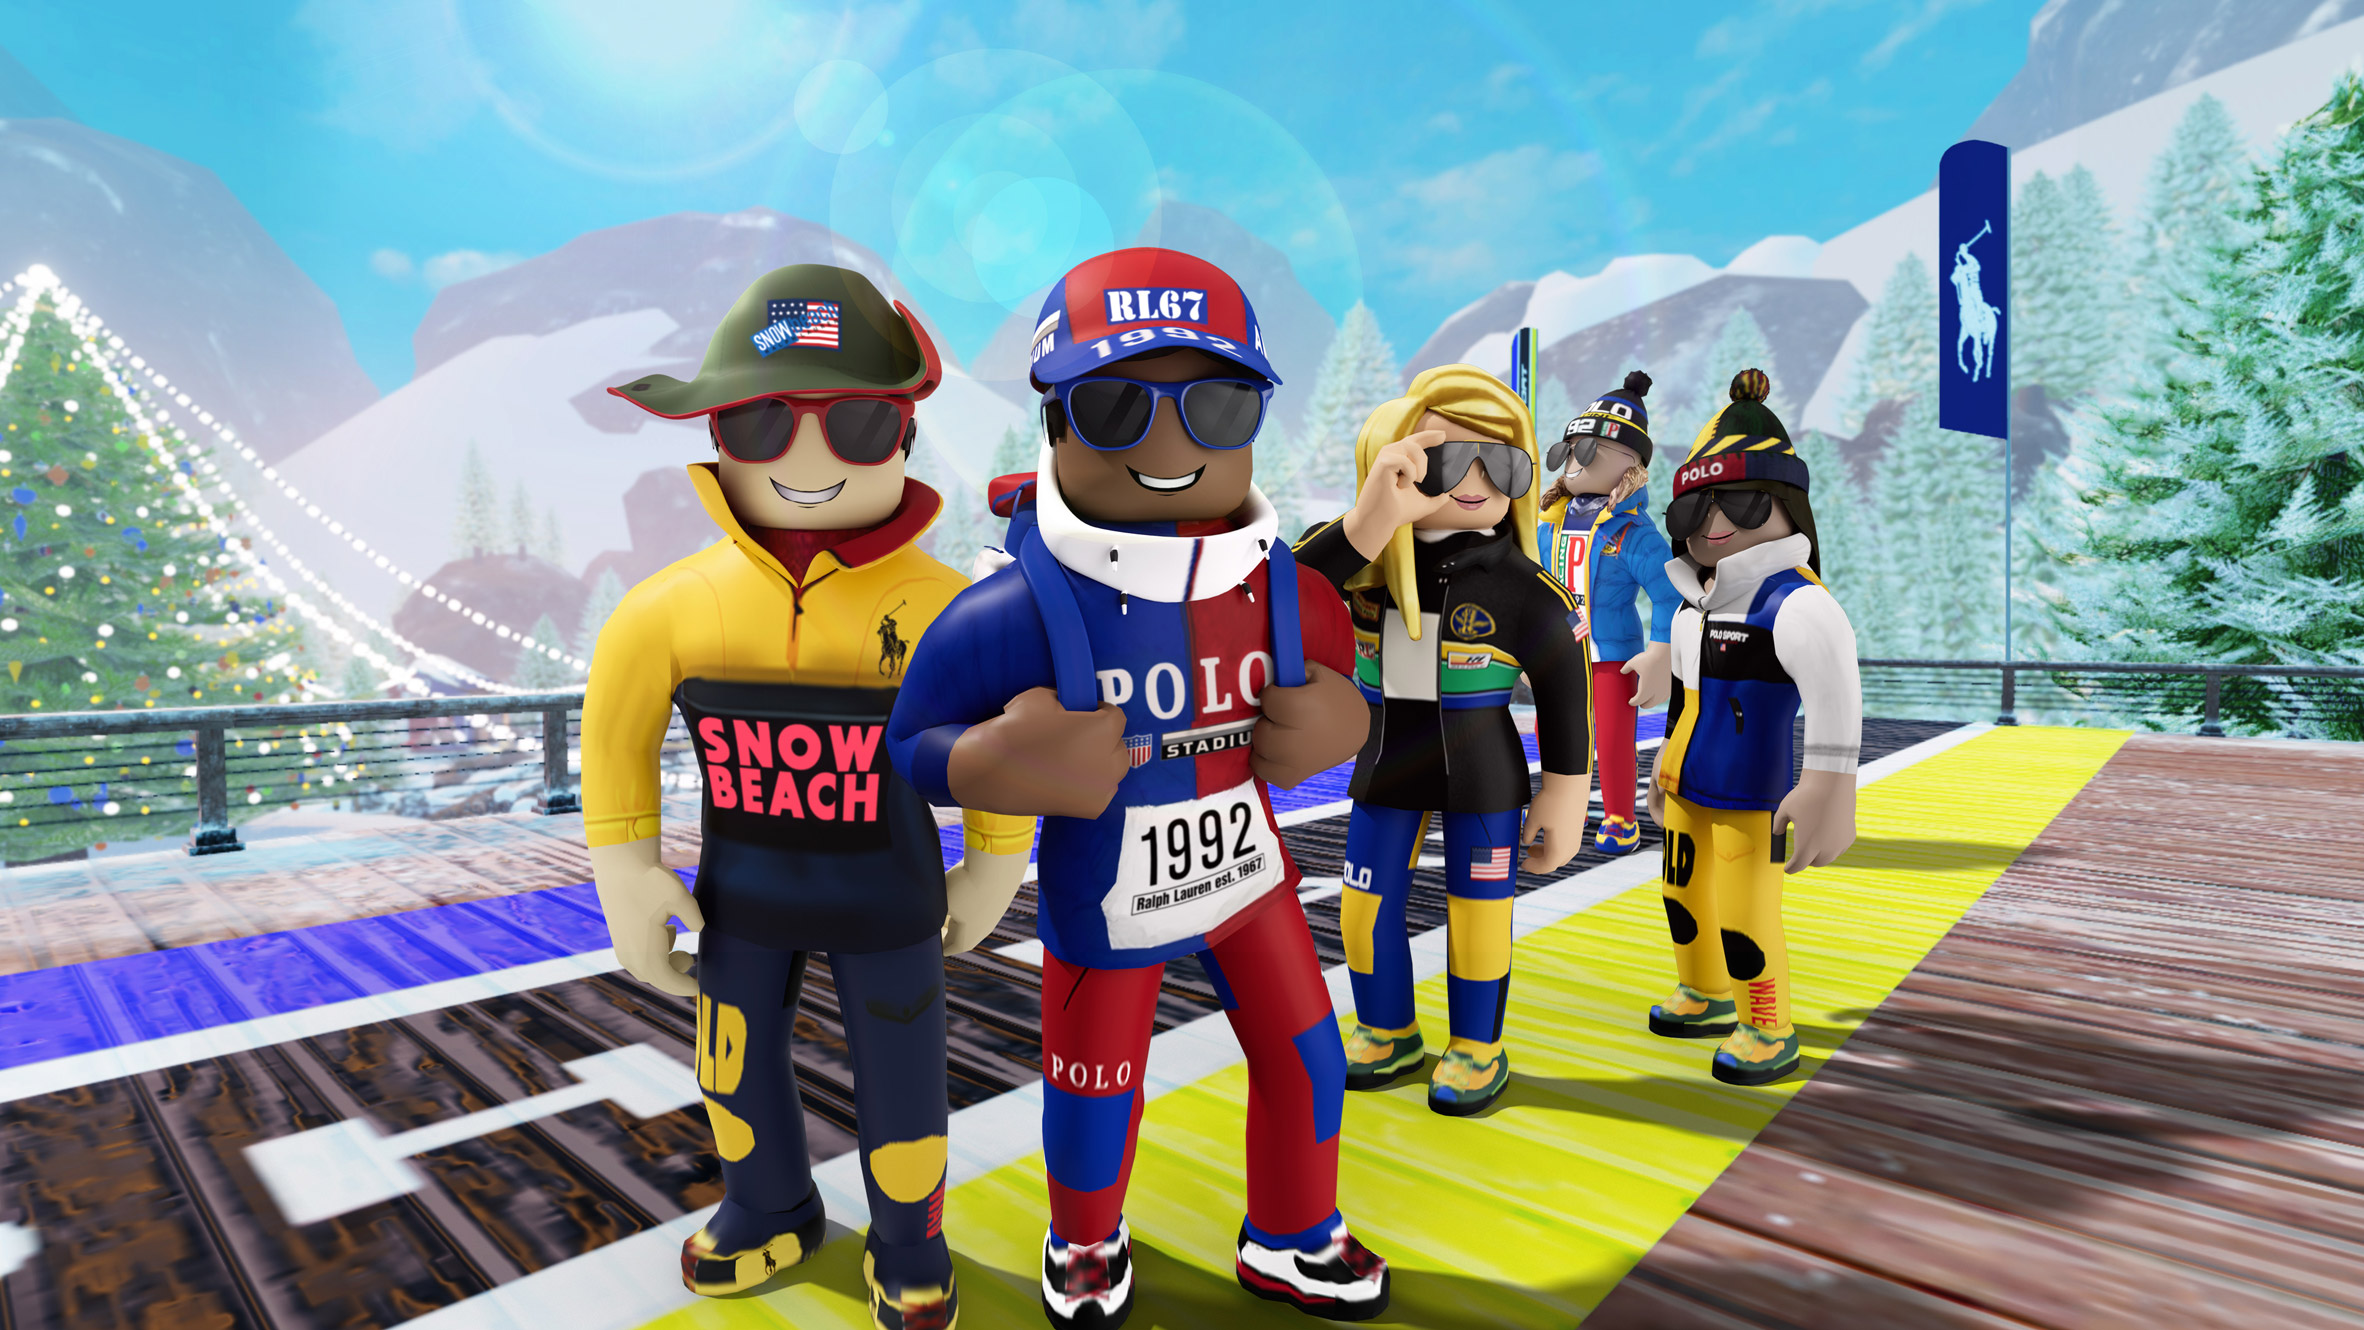 Image of Roblox avatars wearing Polo Ralph Lauren against a snowy background